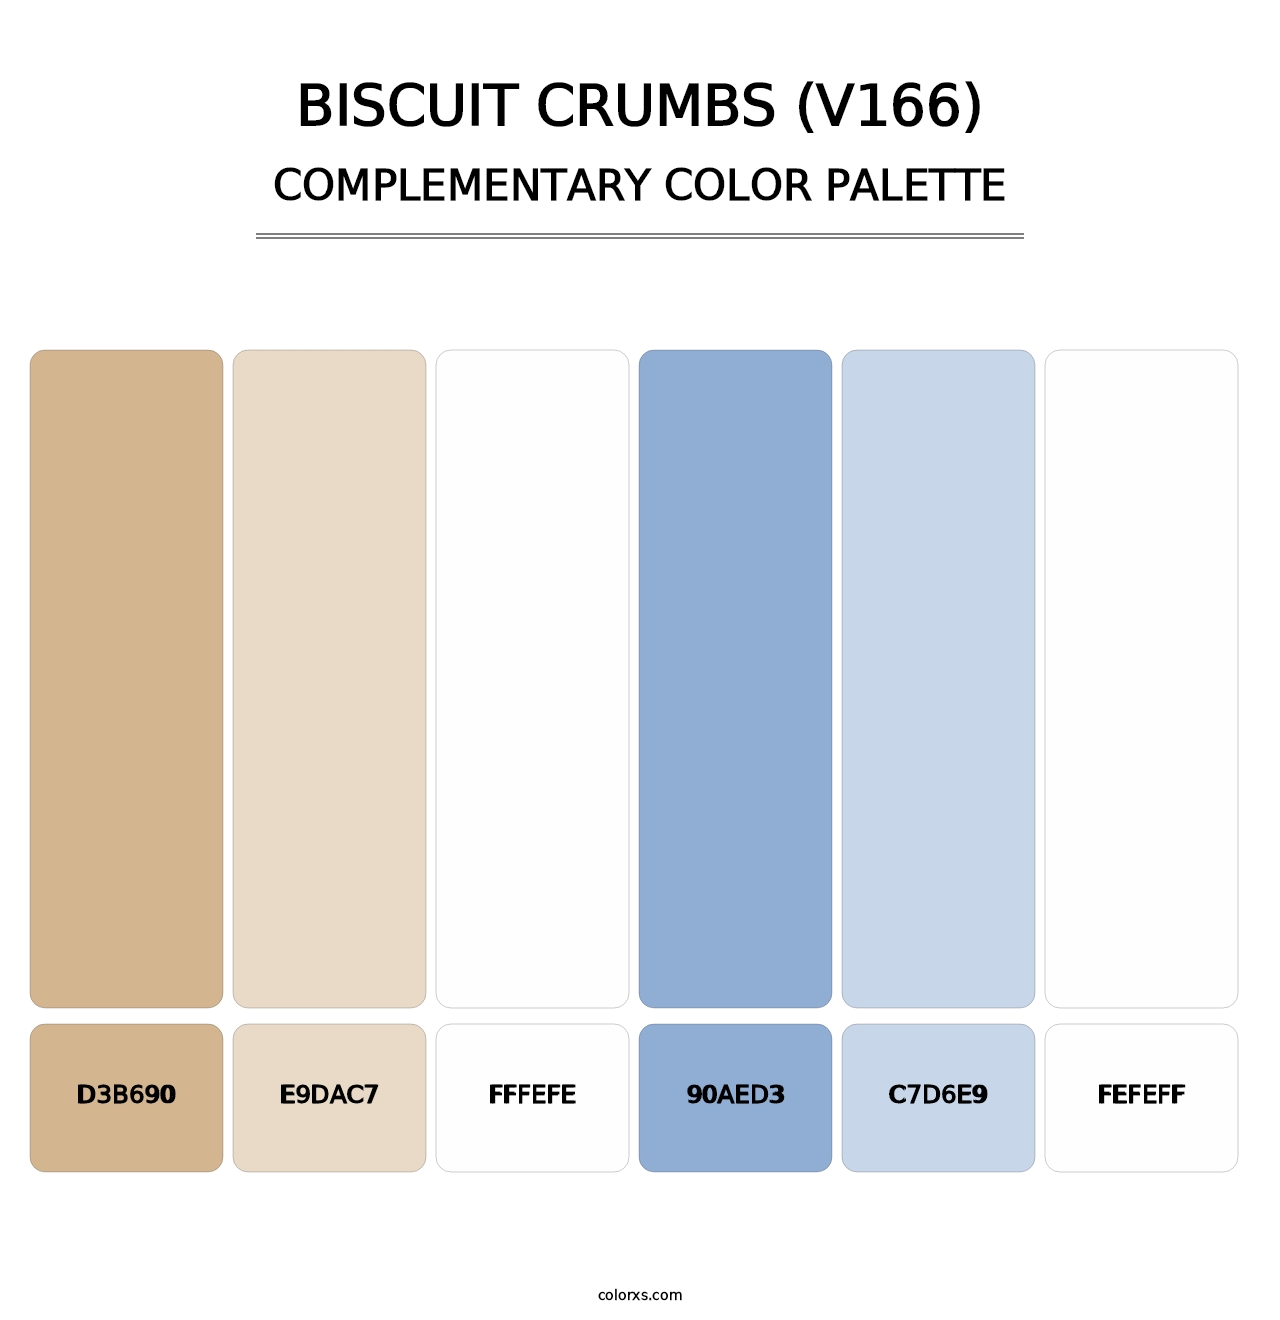 Biscuit Crumbs (V166) - Complementary Color Palette